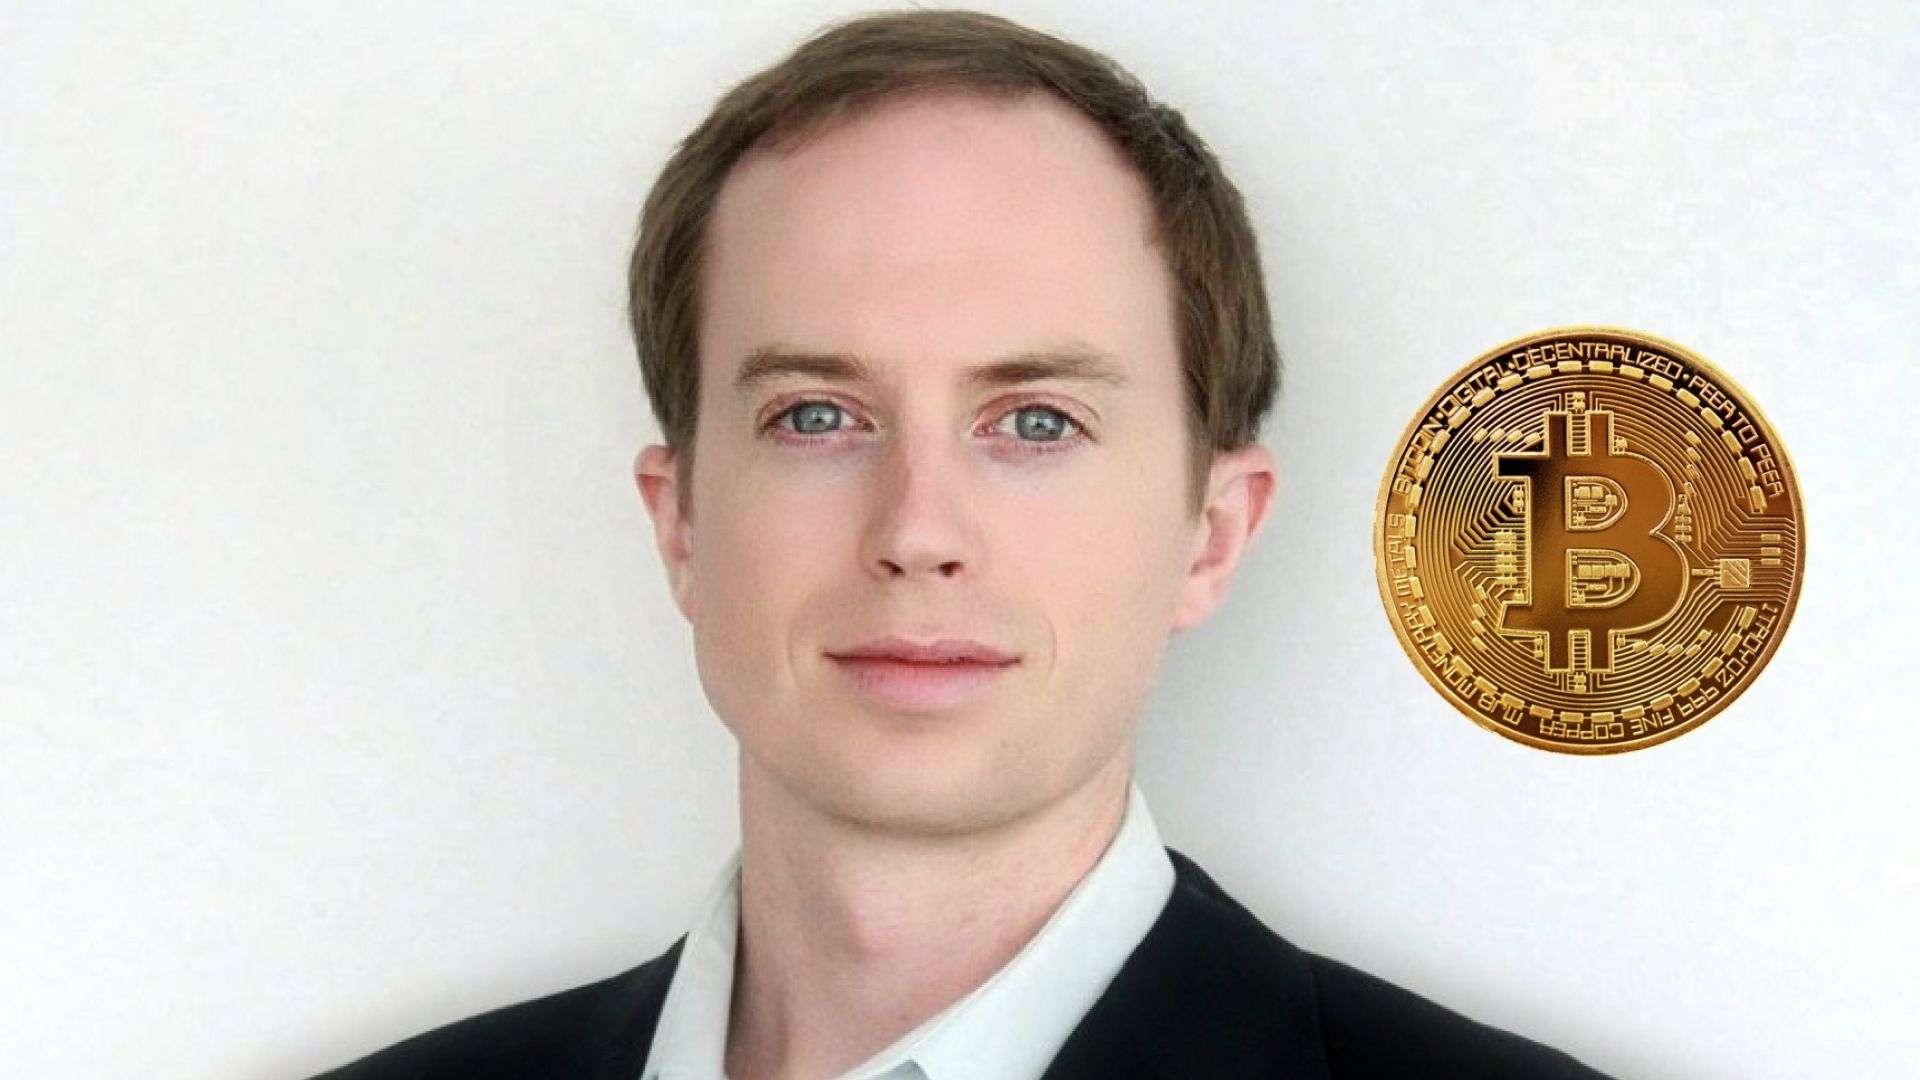 cryptodaily.co.uk: Crypto CEO Voorhees says we are in a financial revolution